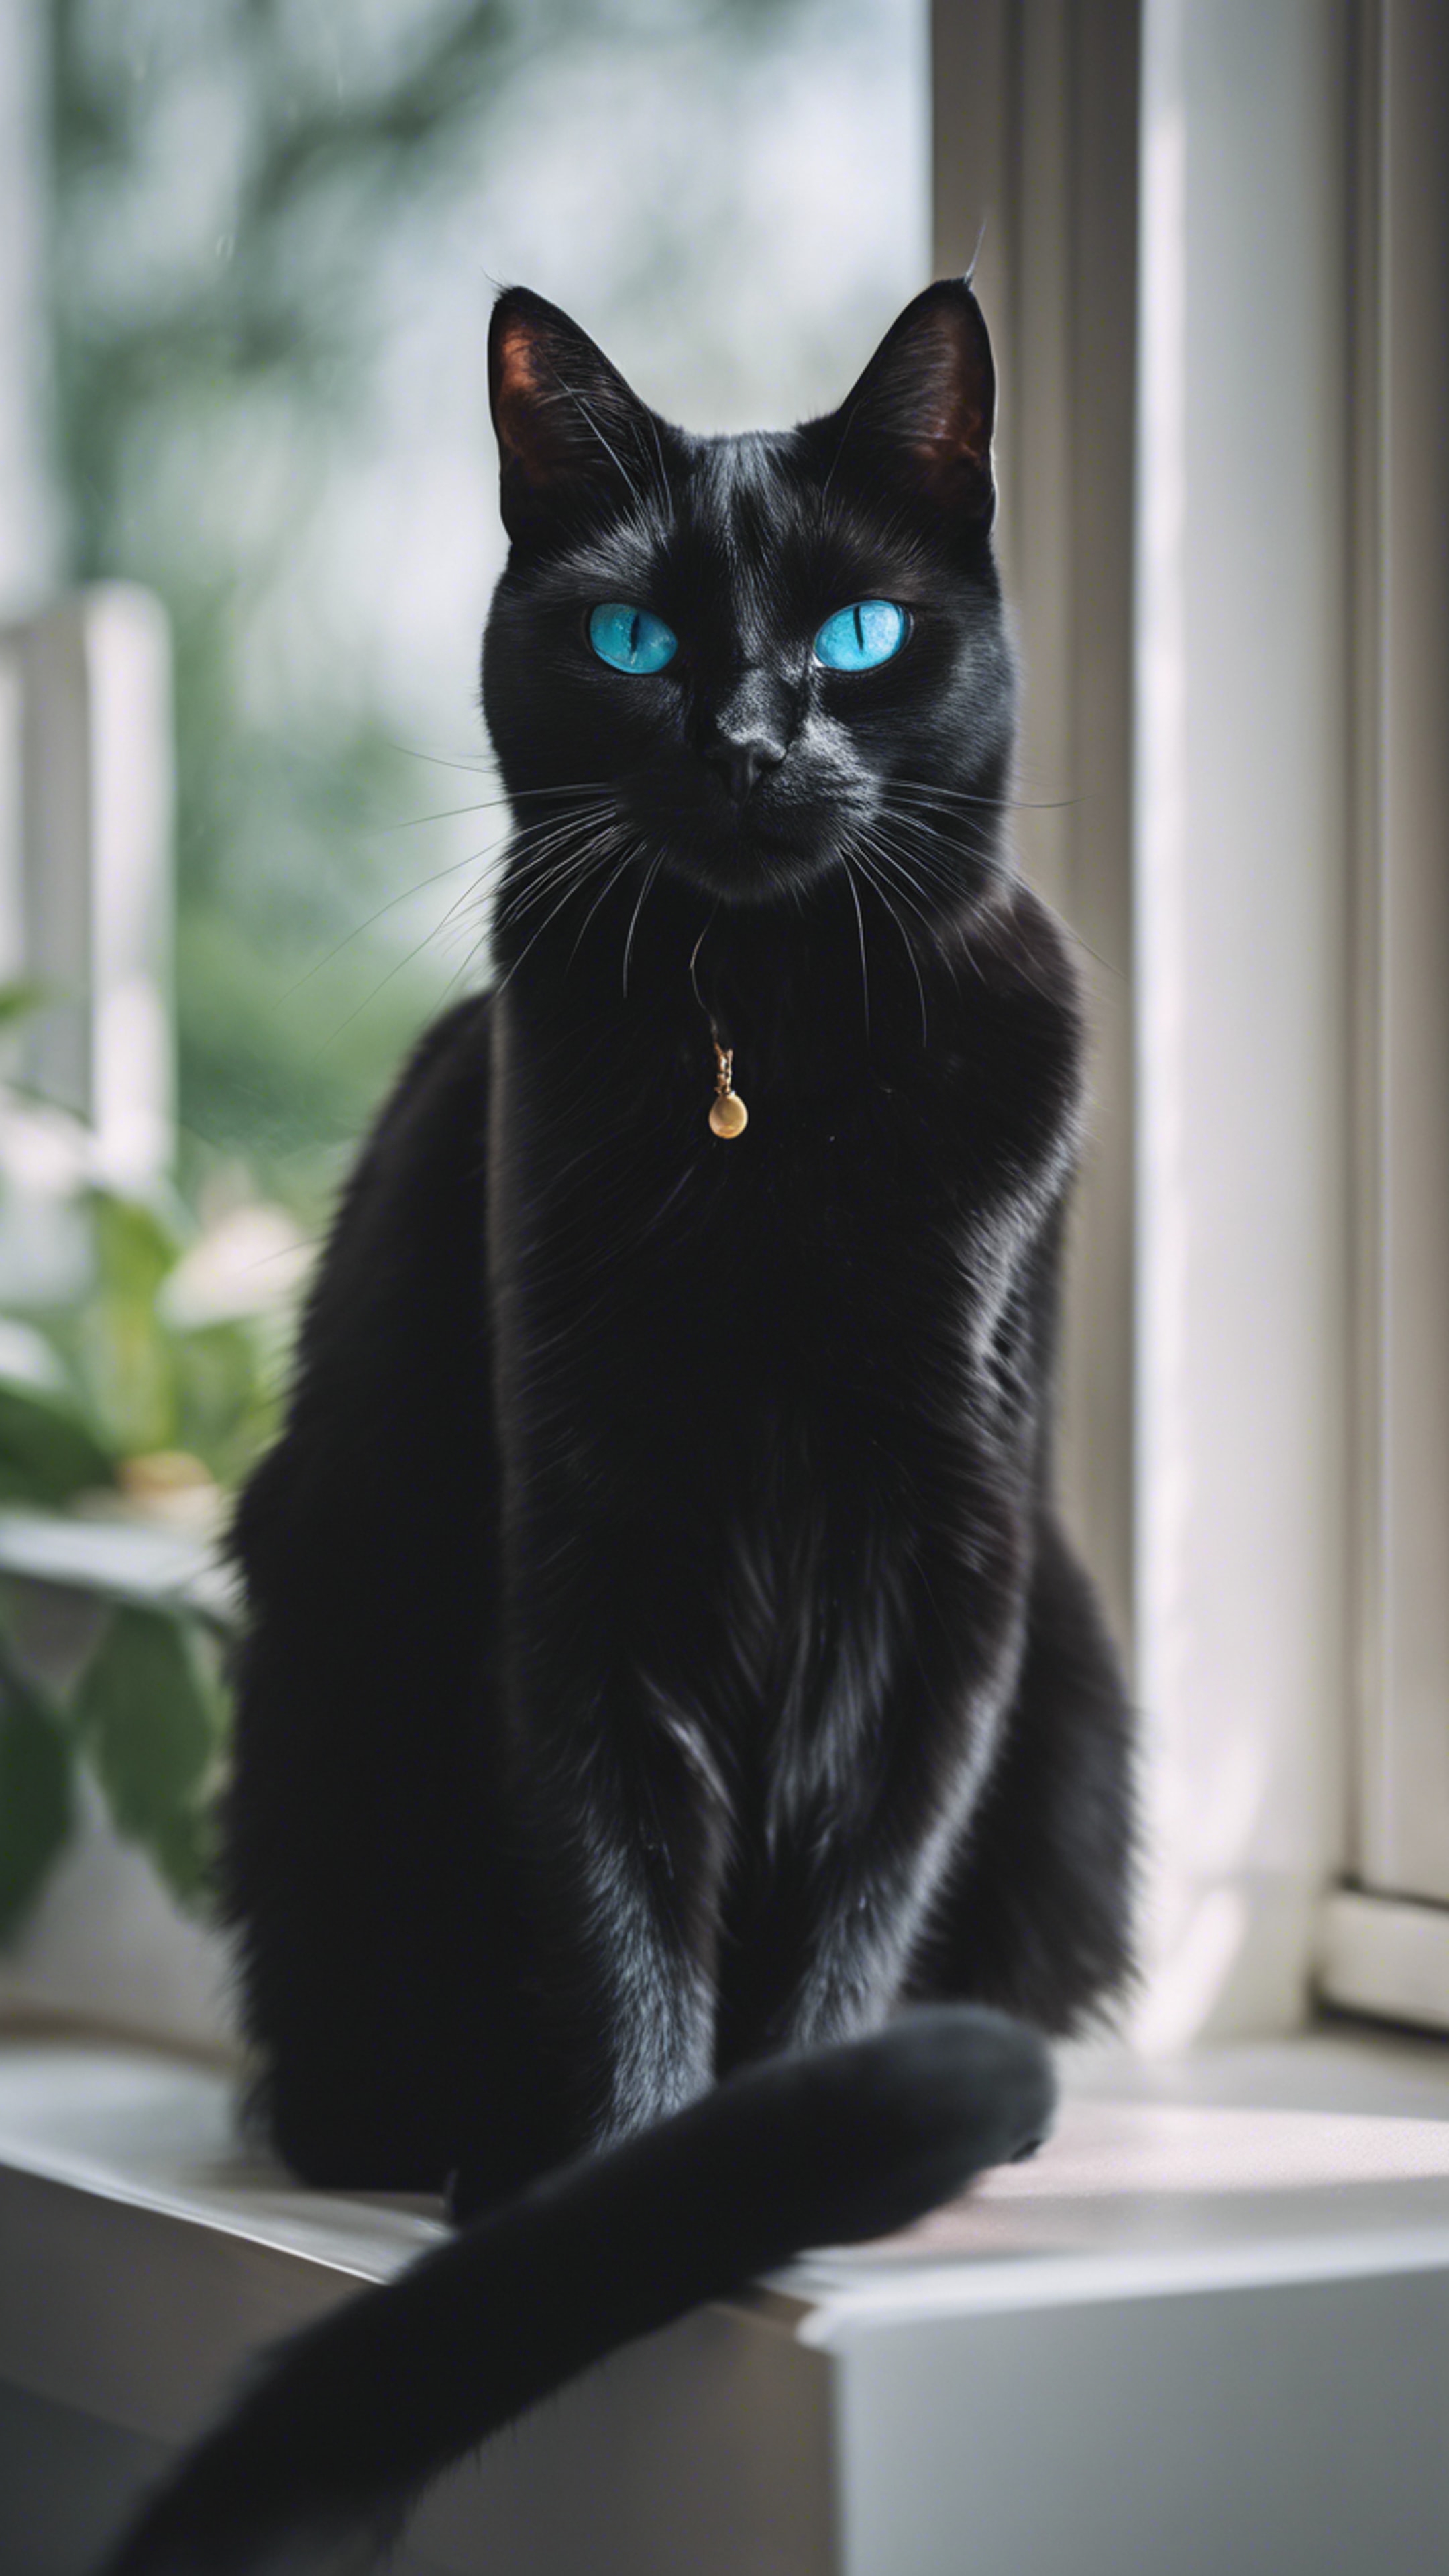 A black cat with piercing aqua eyes sitting serenely on a white windowsill. Wallpaper[8e423f1aedee46d7bd19]